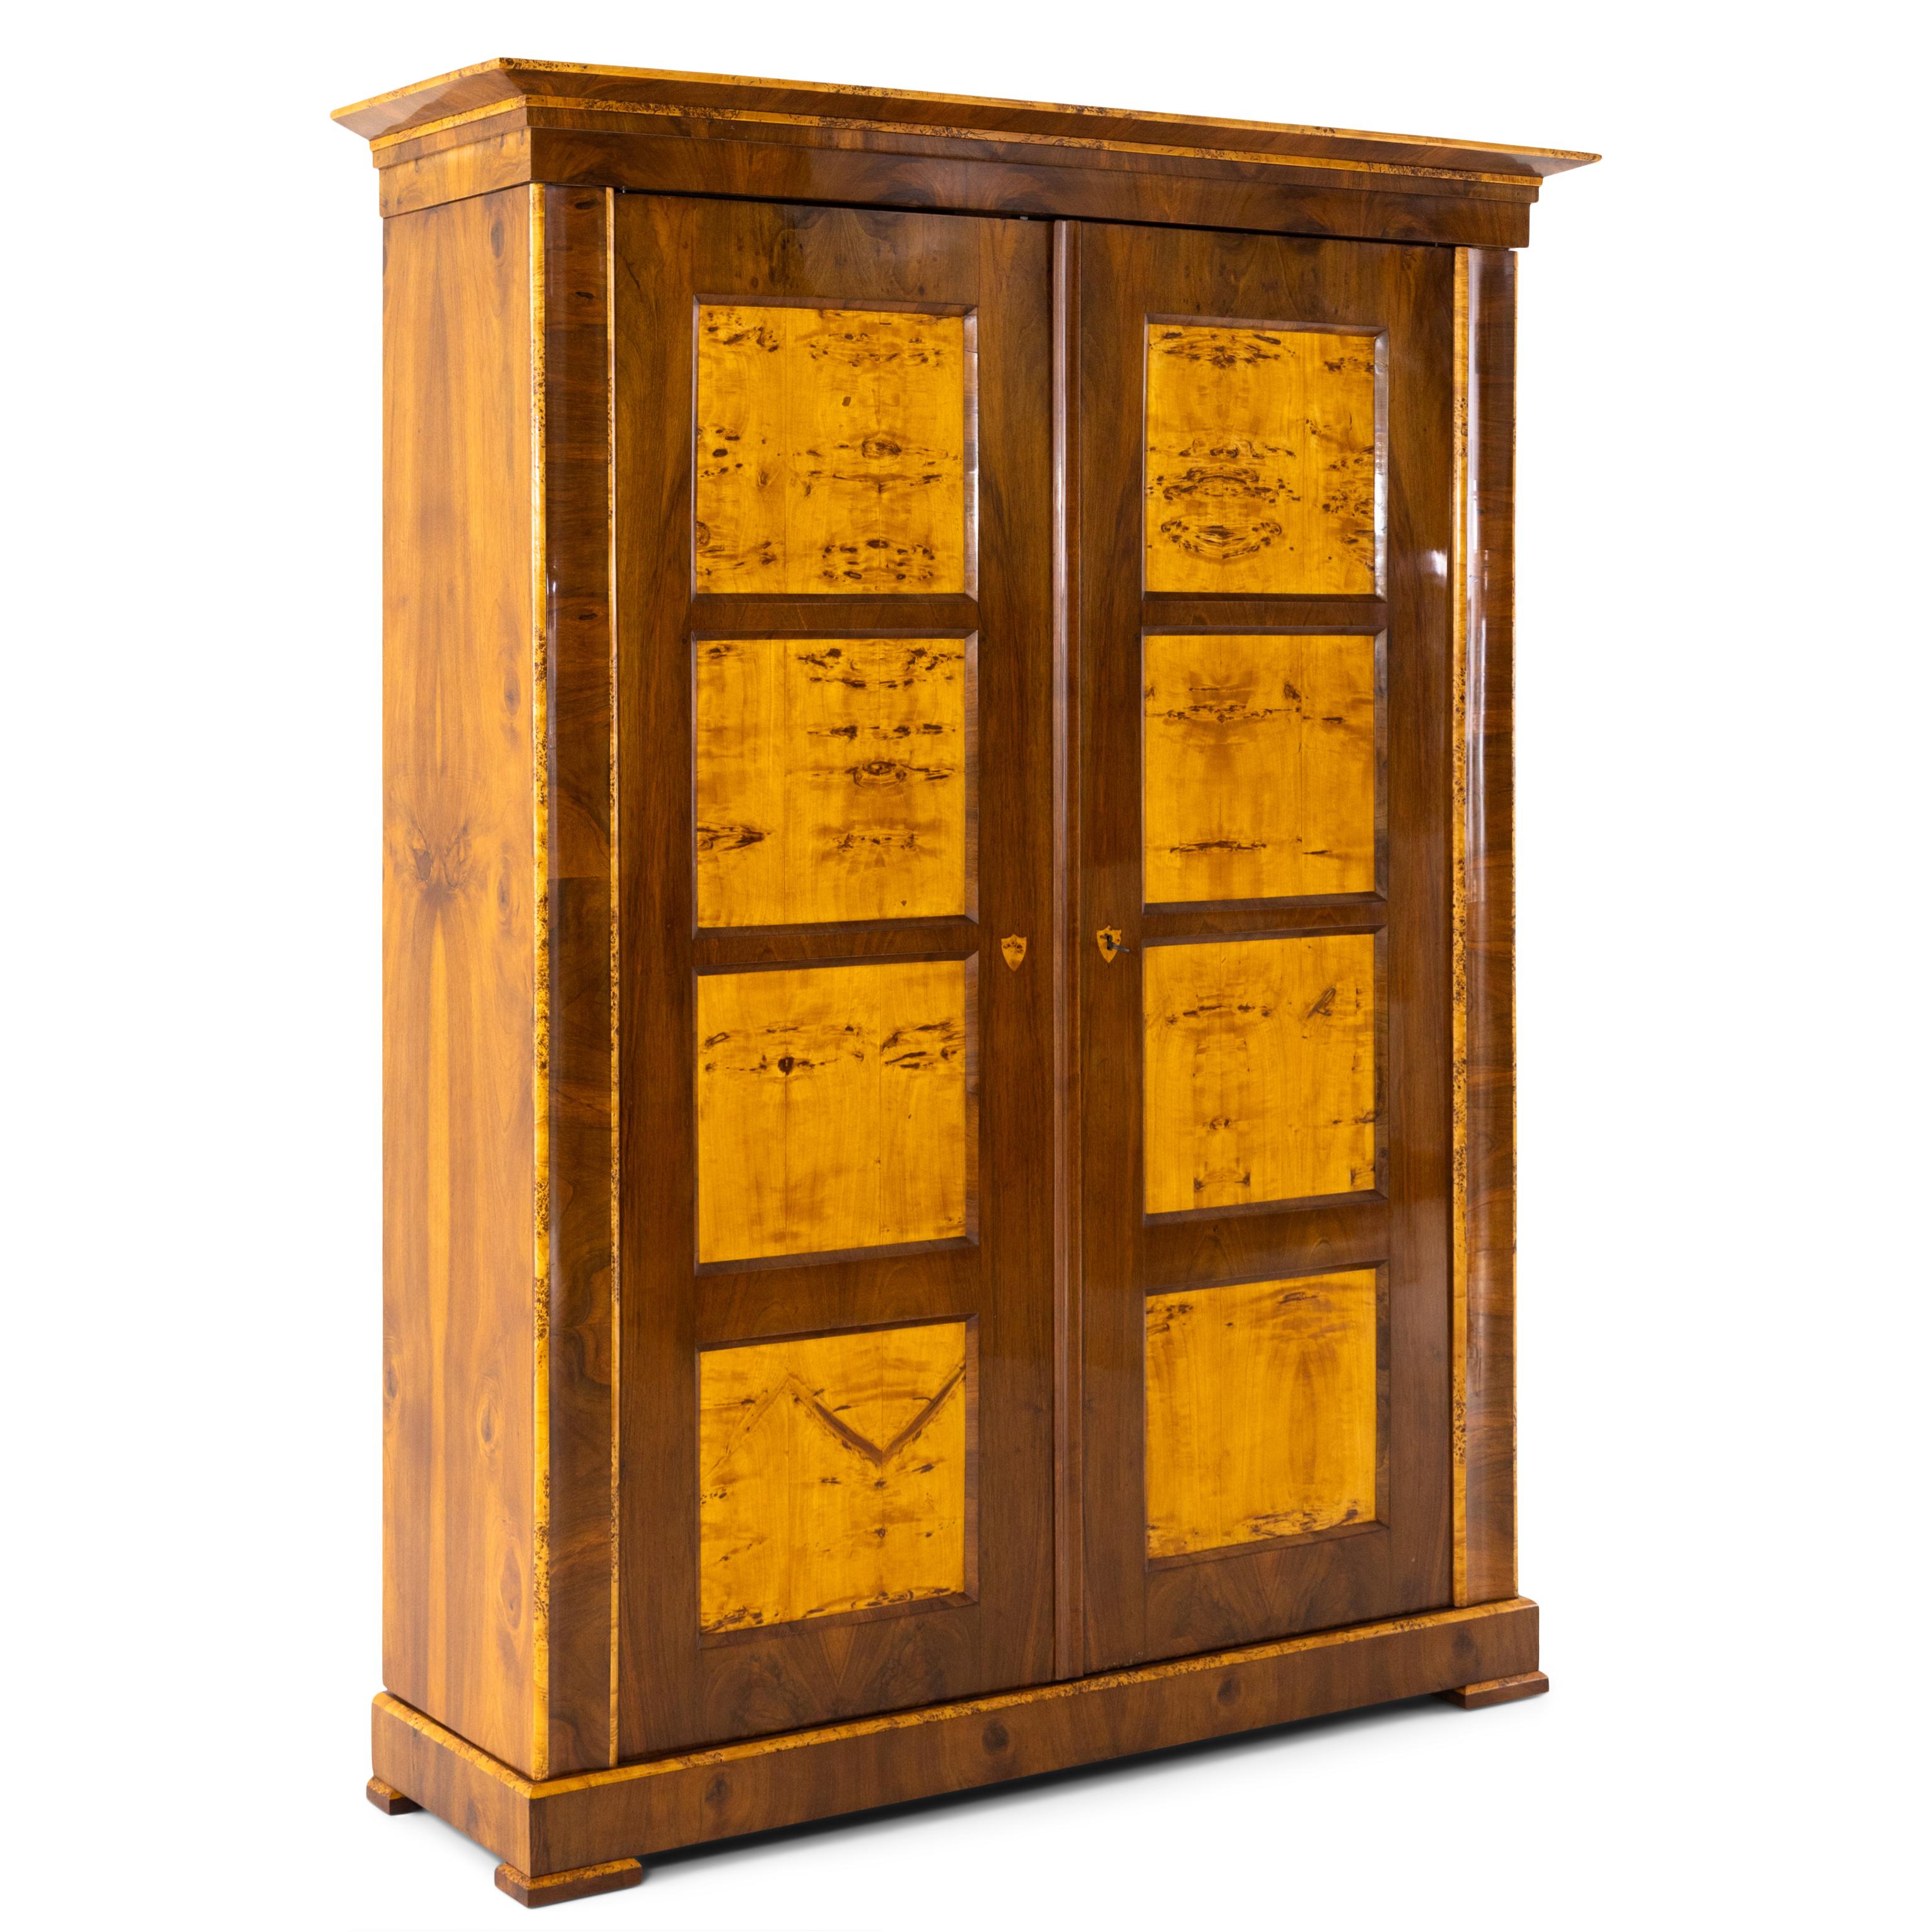 Two-door Biedermeier walnut cabinet with coffered doors and profiled cornice. The edges are set off in poplar.